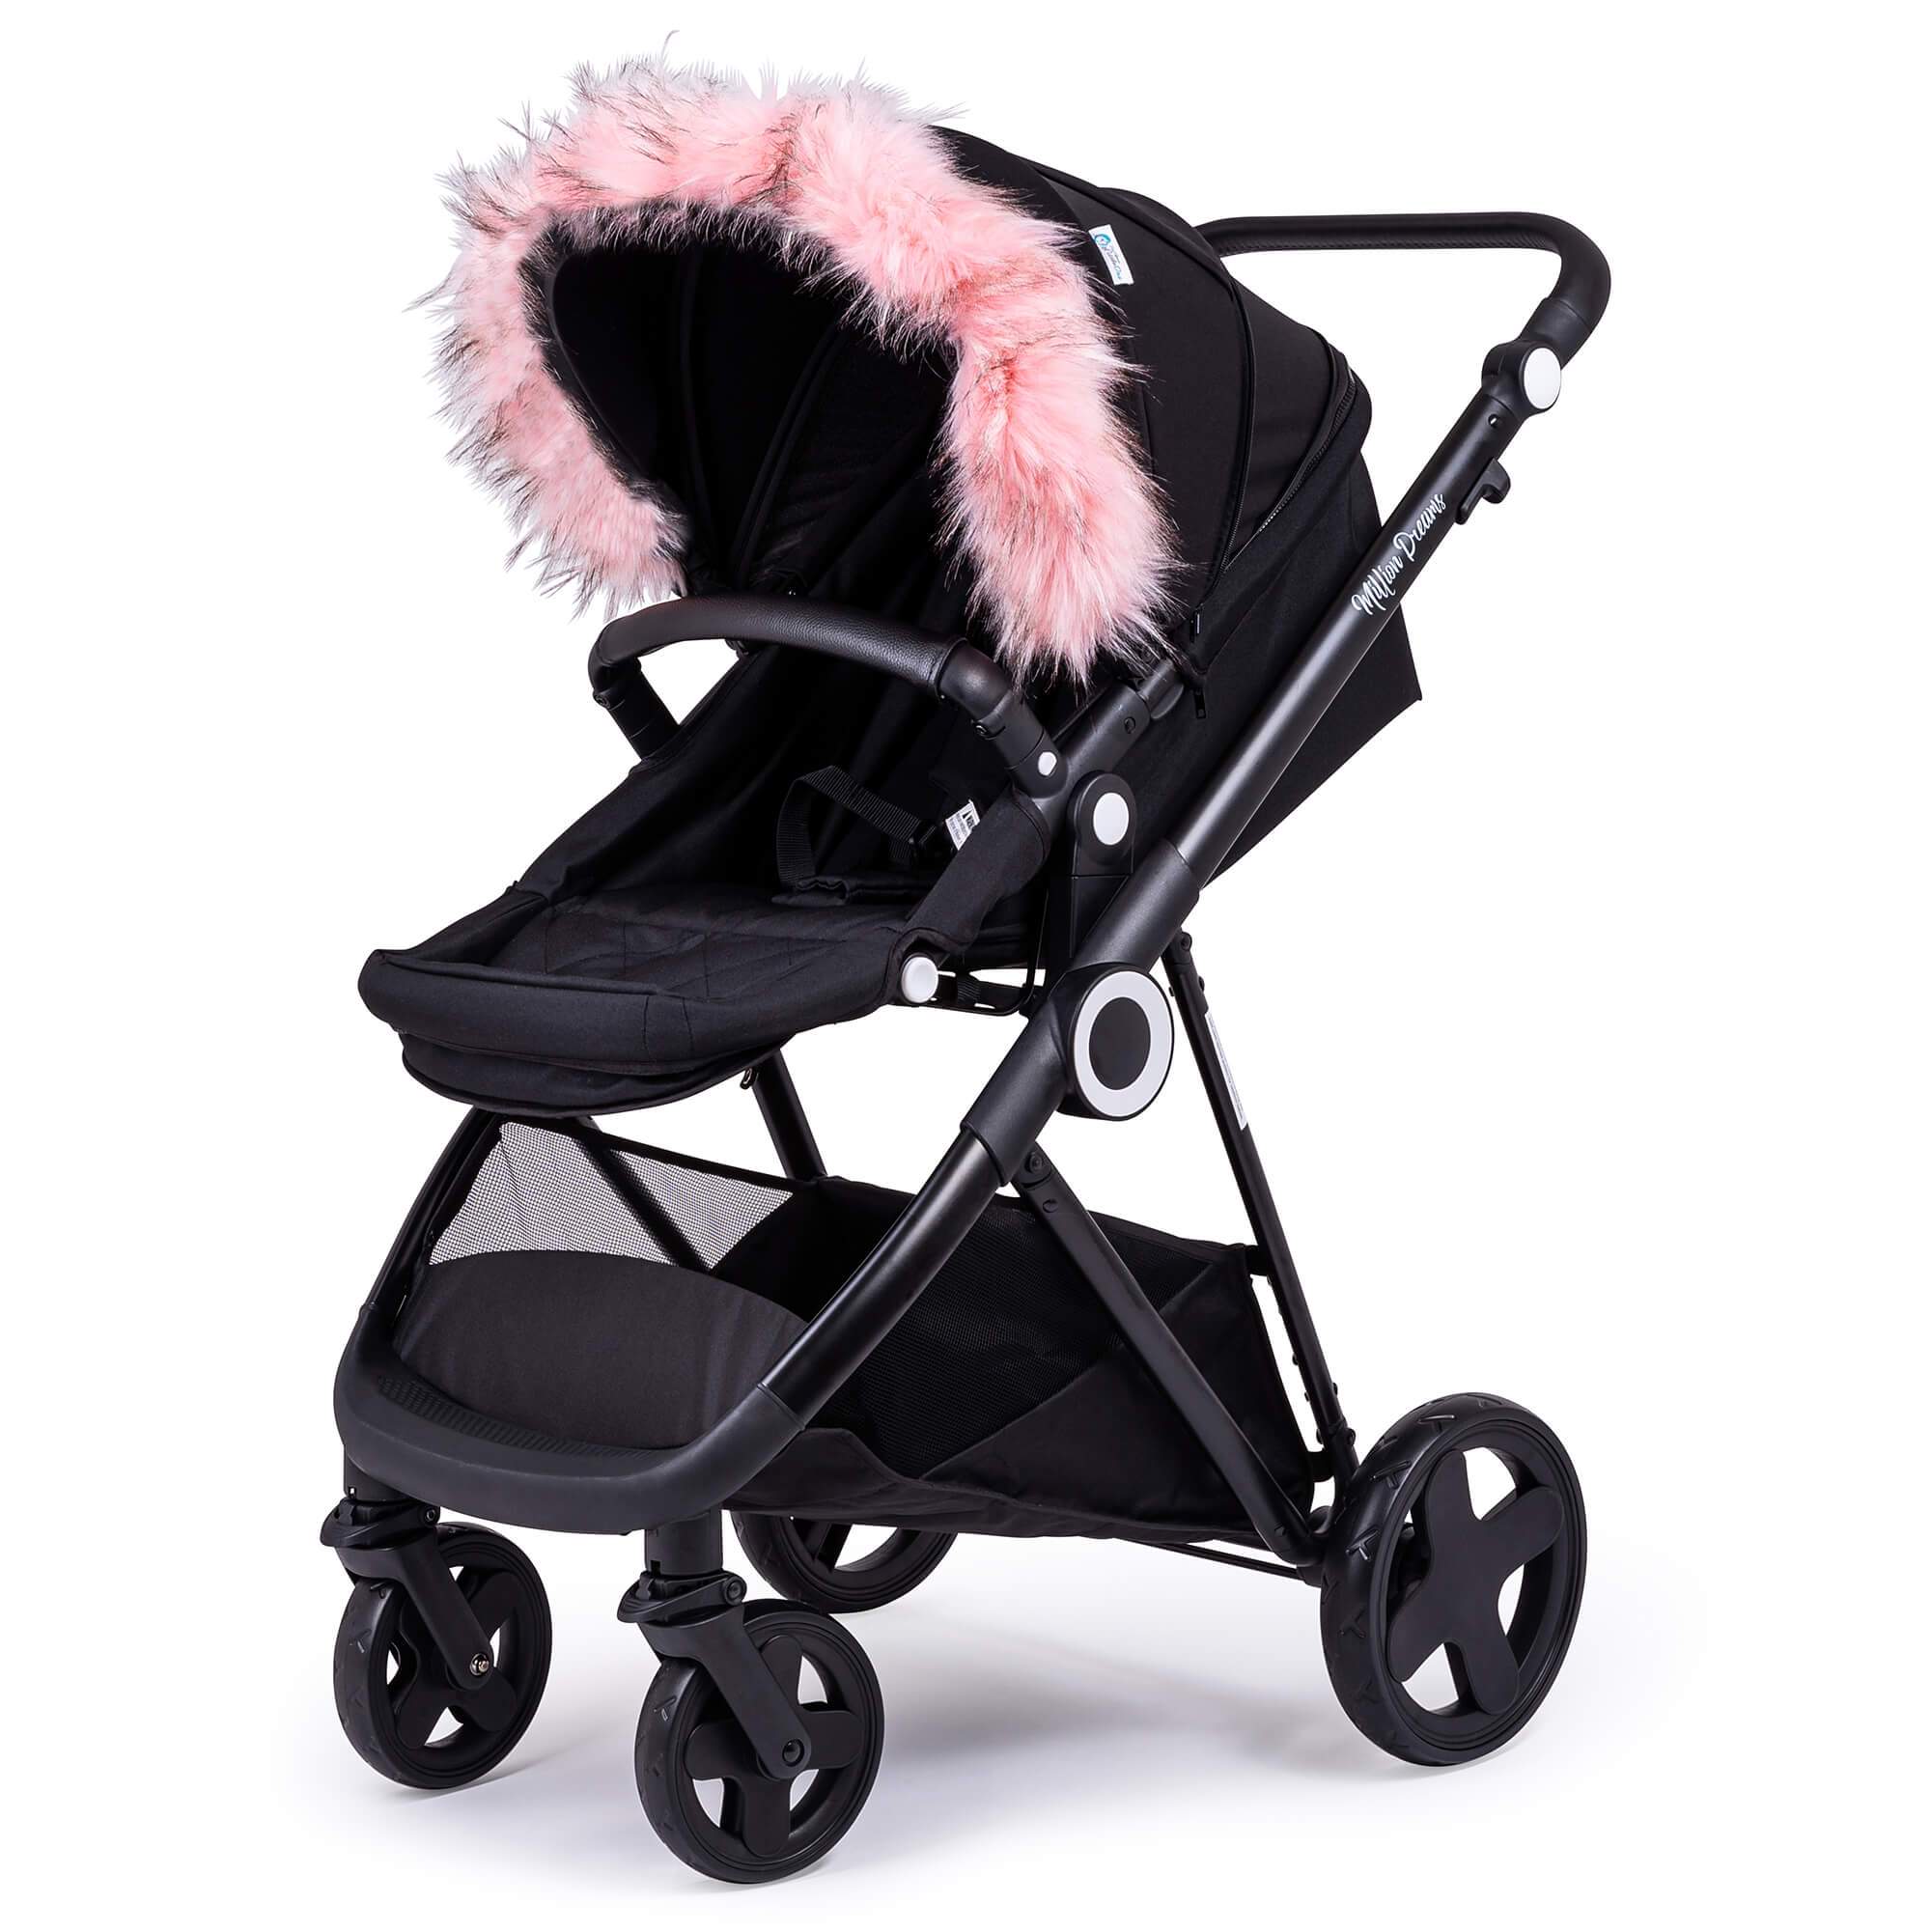 Pram Fur Hood Trim Attachment For Pushchair Compatible with Baby Elegance - Light Pink / Fits All Models | For Your Little One